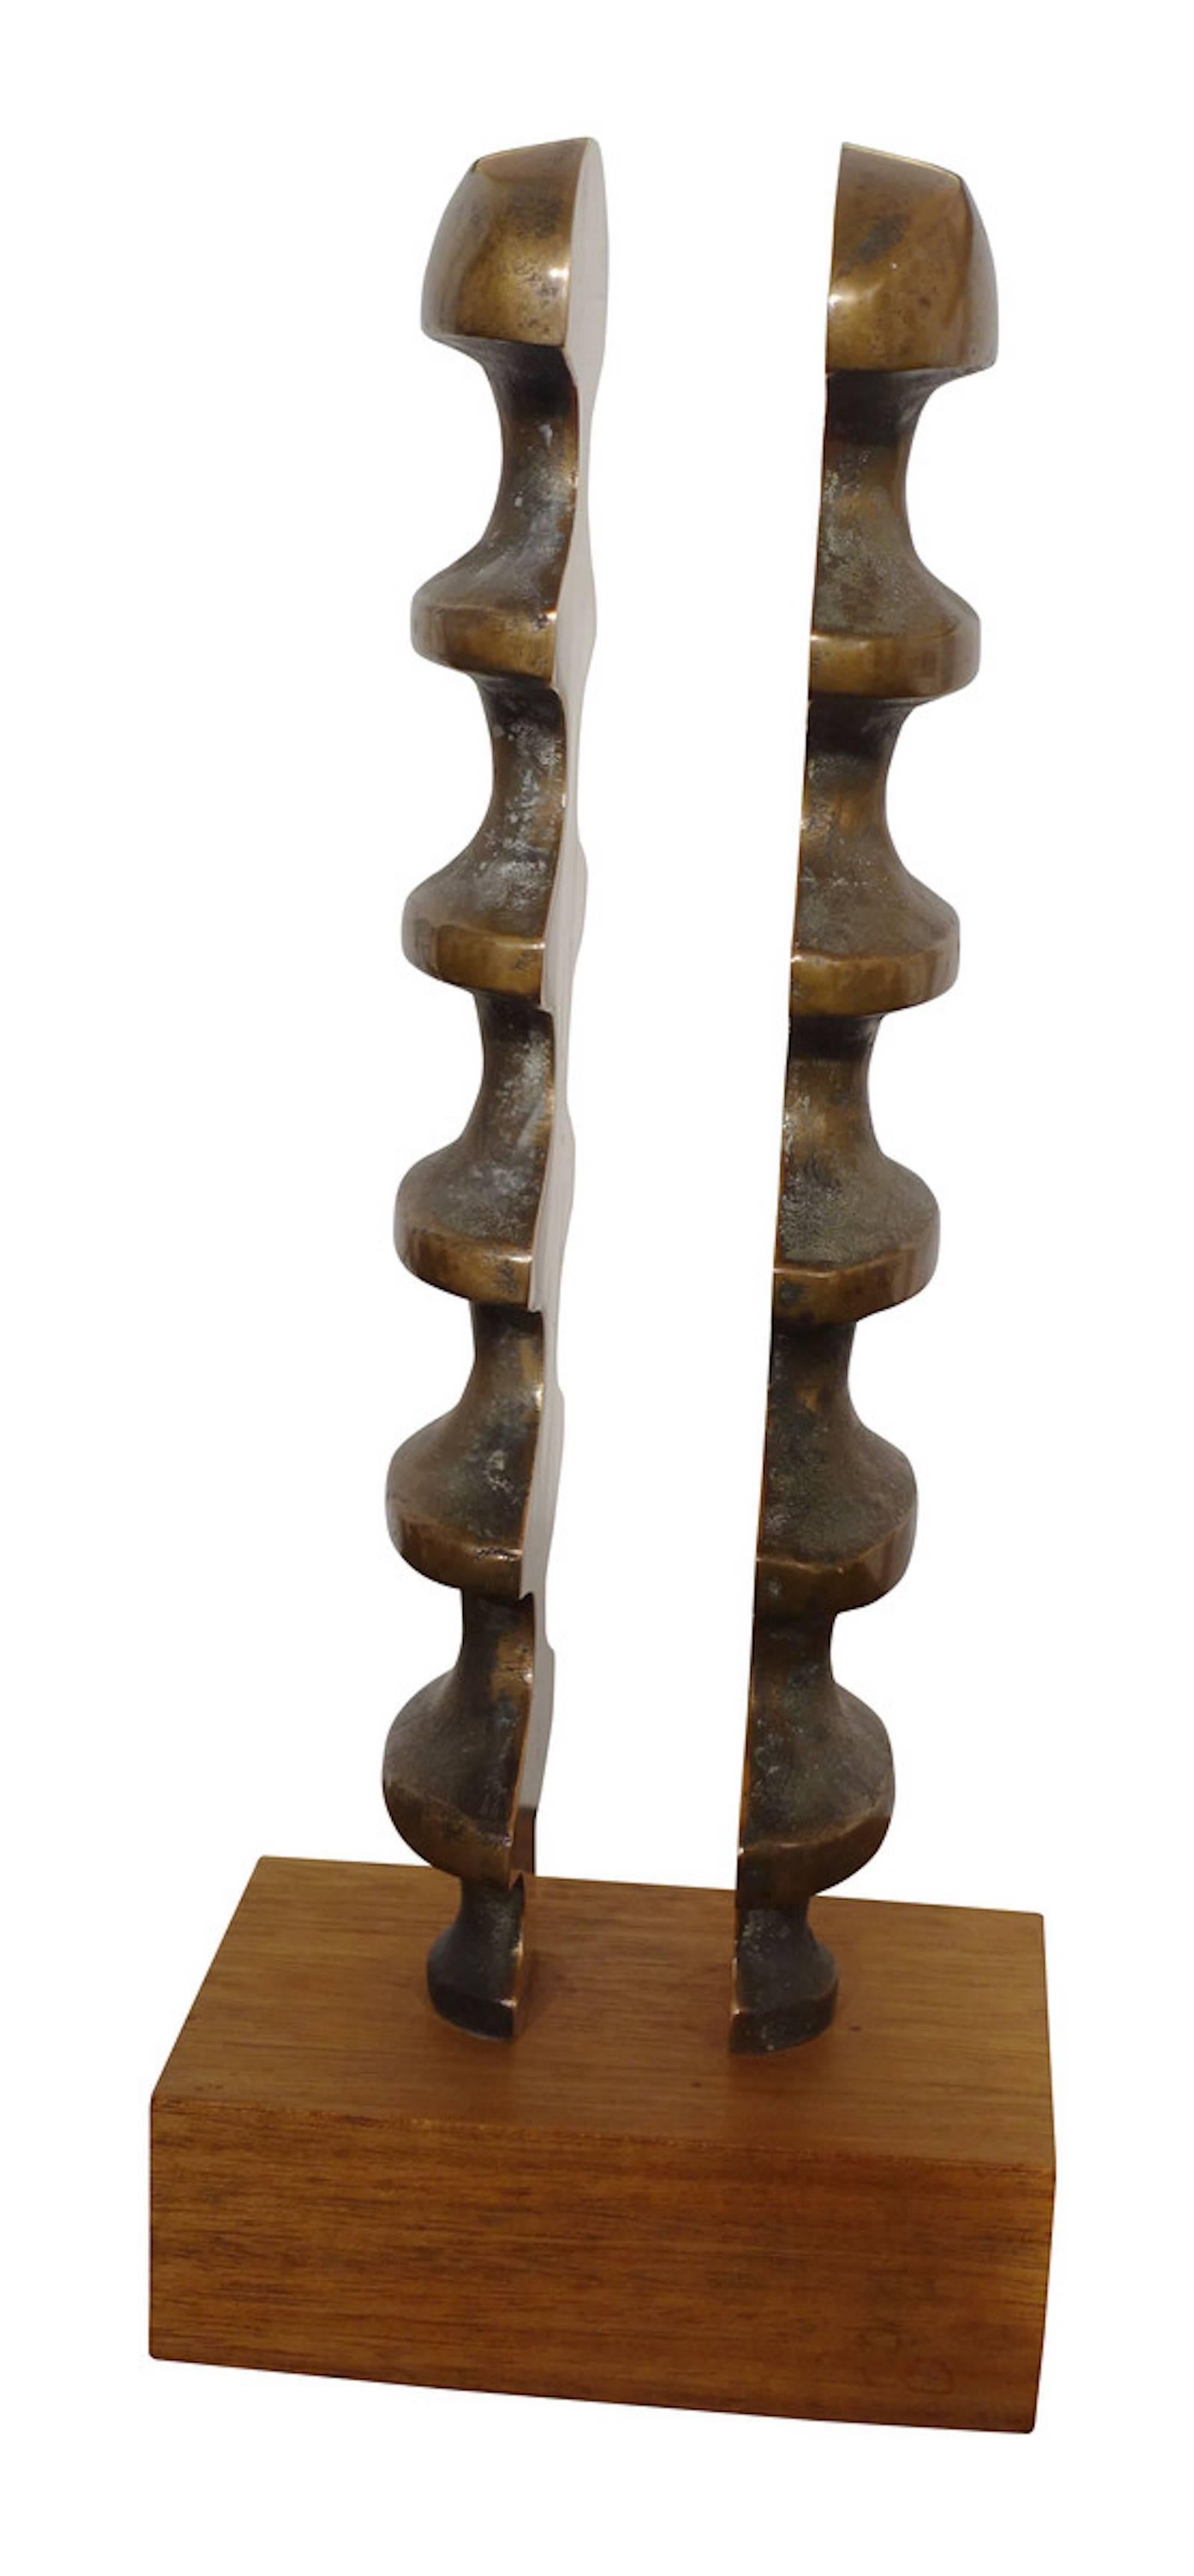 English sculptor Neil Willis (1932-2011) bronze abstract on wooden base.
Base measures: 6 inches x 4 inches
Arriving April.